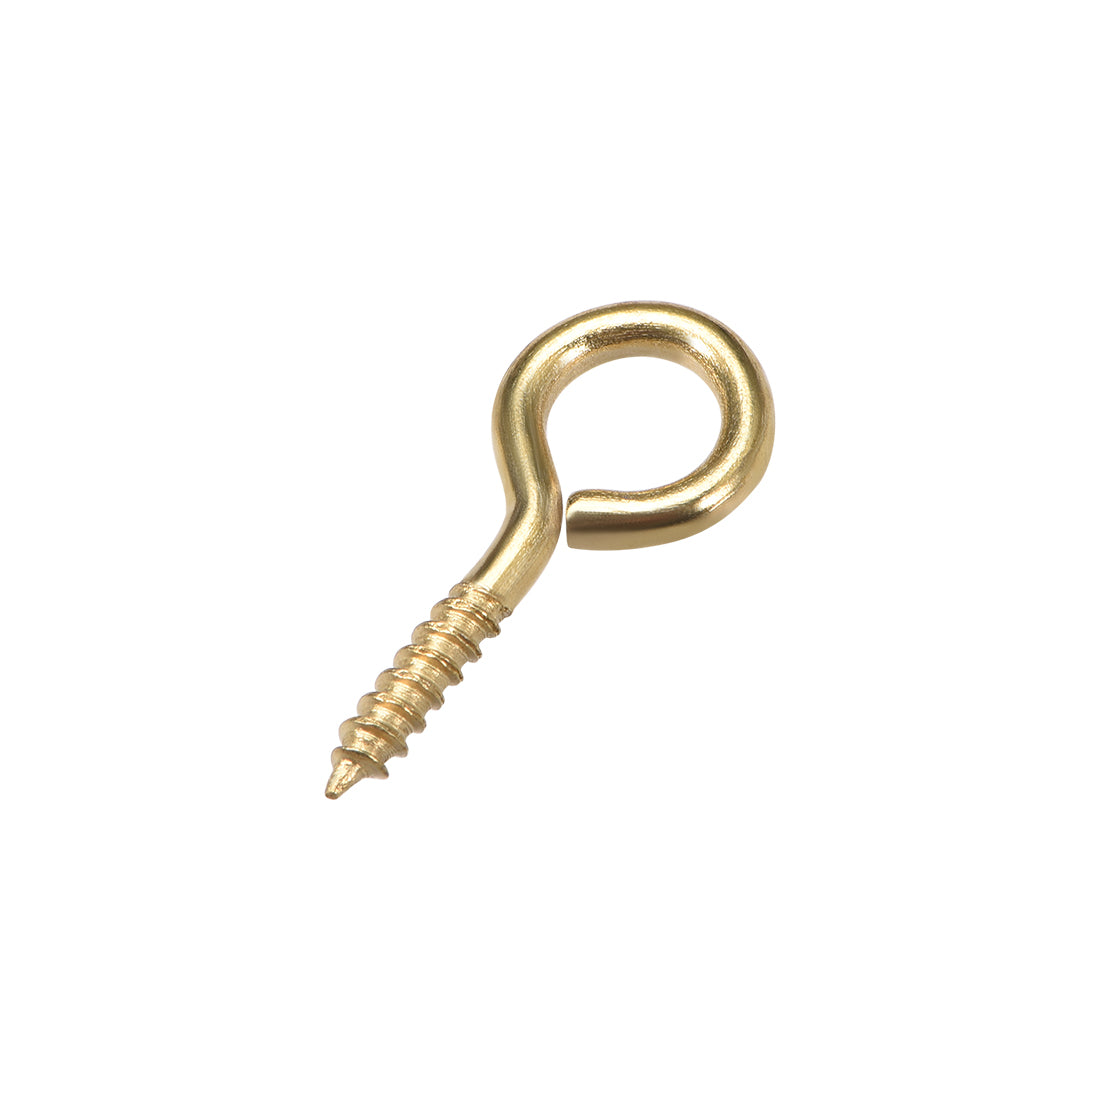 uxcell Uxcell 1.1" Small Screw Eye Hooks Self Tapping Screws Carbon Steel Screw-in Hanger Eye-Shape Ring Hooks Gold 25pcs